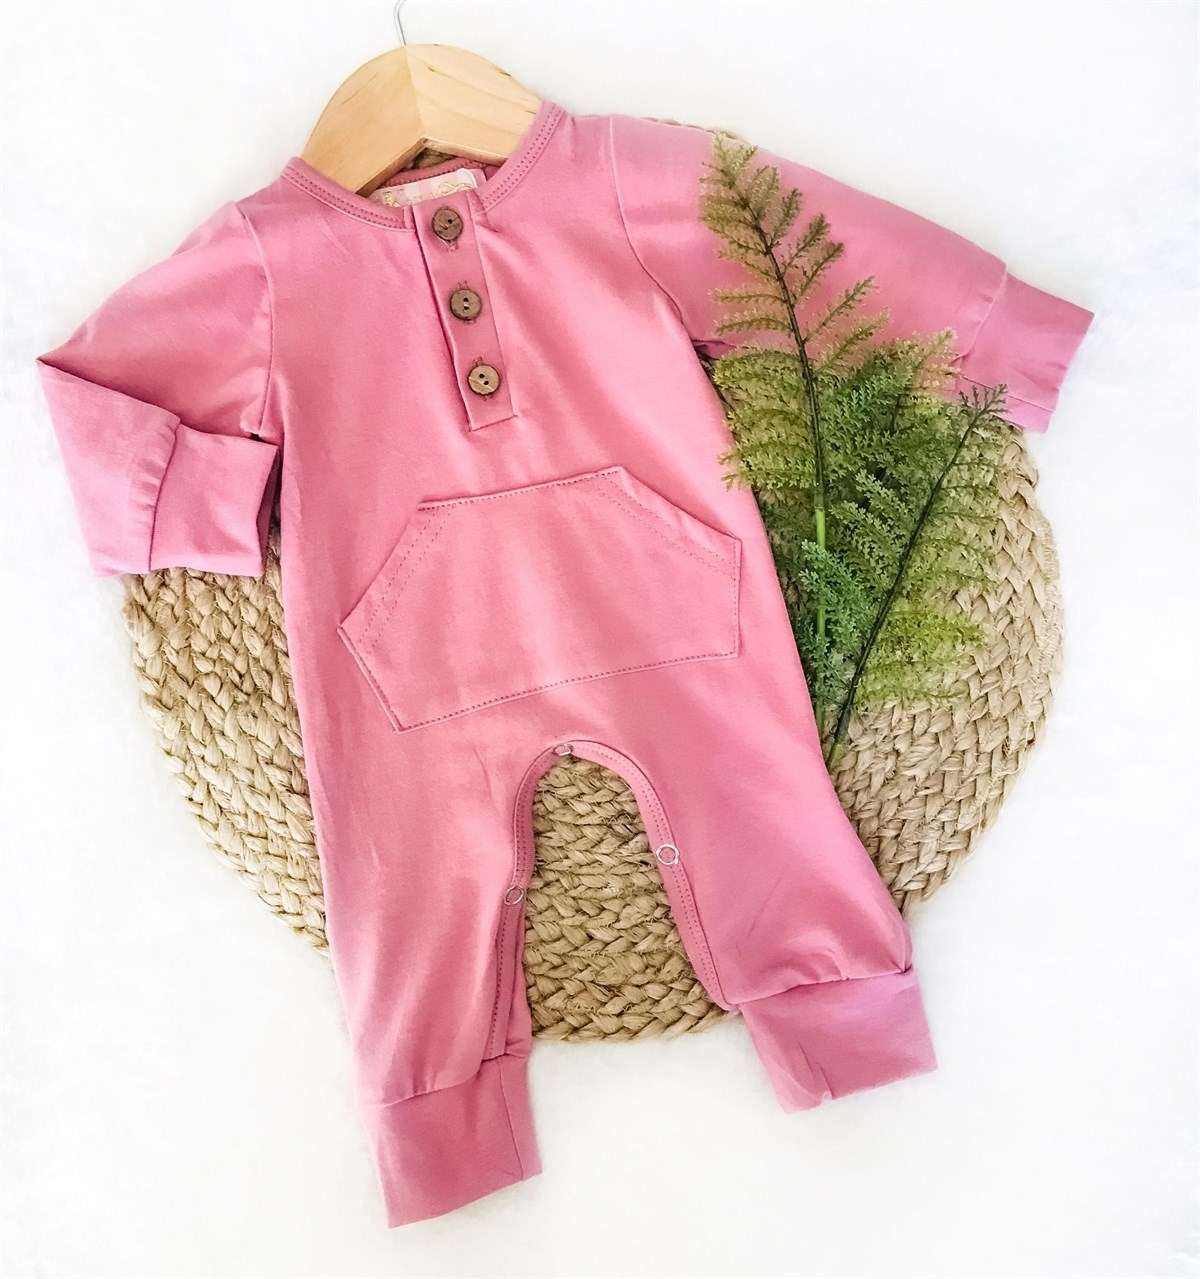 Baby Girls Dusty Rose Pocket Deluxe Romper - 1/3 buttons around neckline, pocket on front, long sleeves